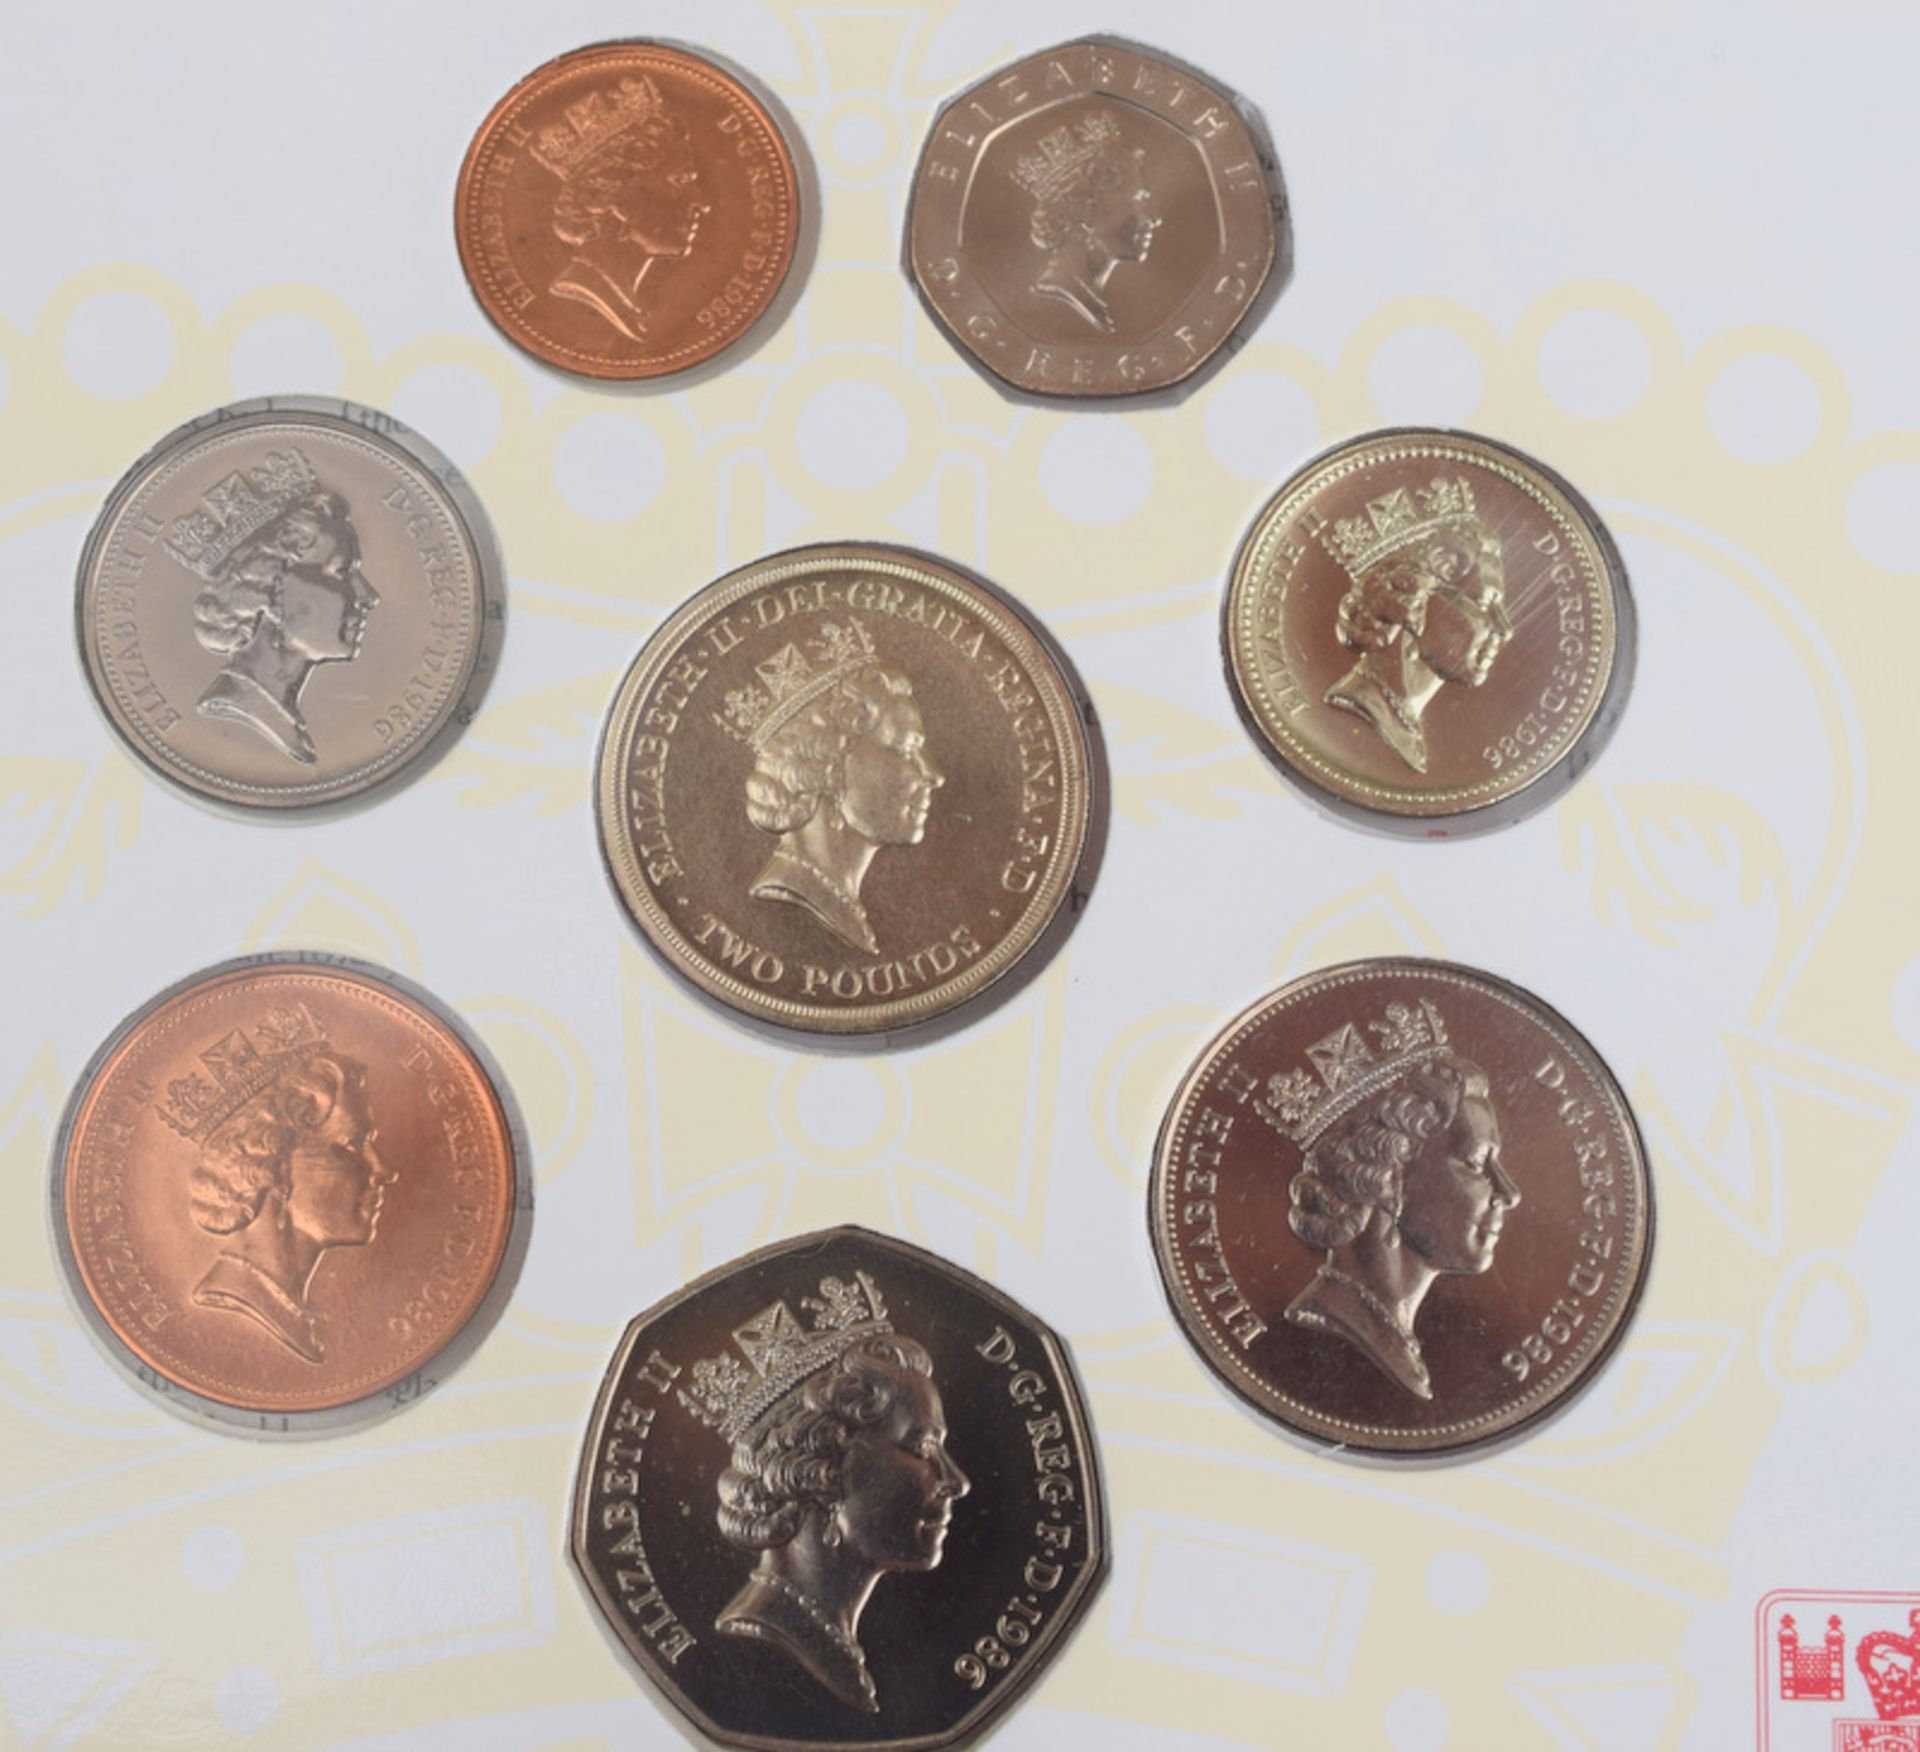 1986 UK Brilliant Uncirculated Coin Set - Image 2 of 4